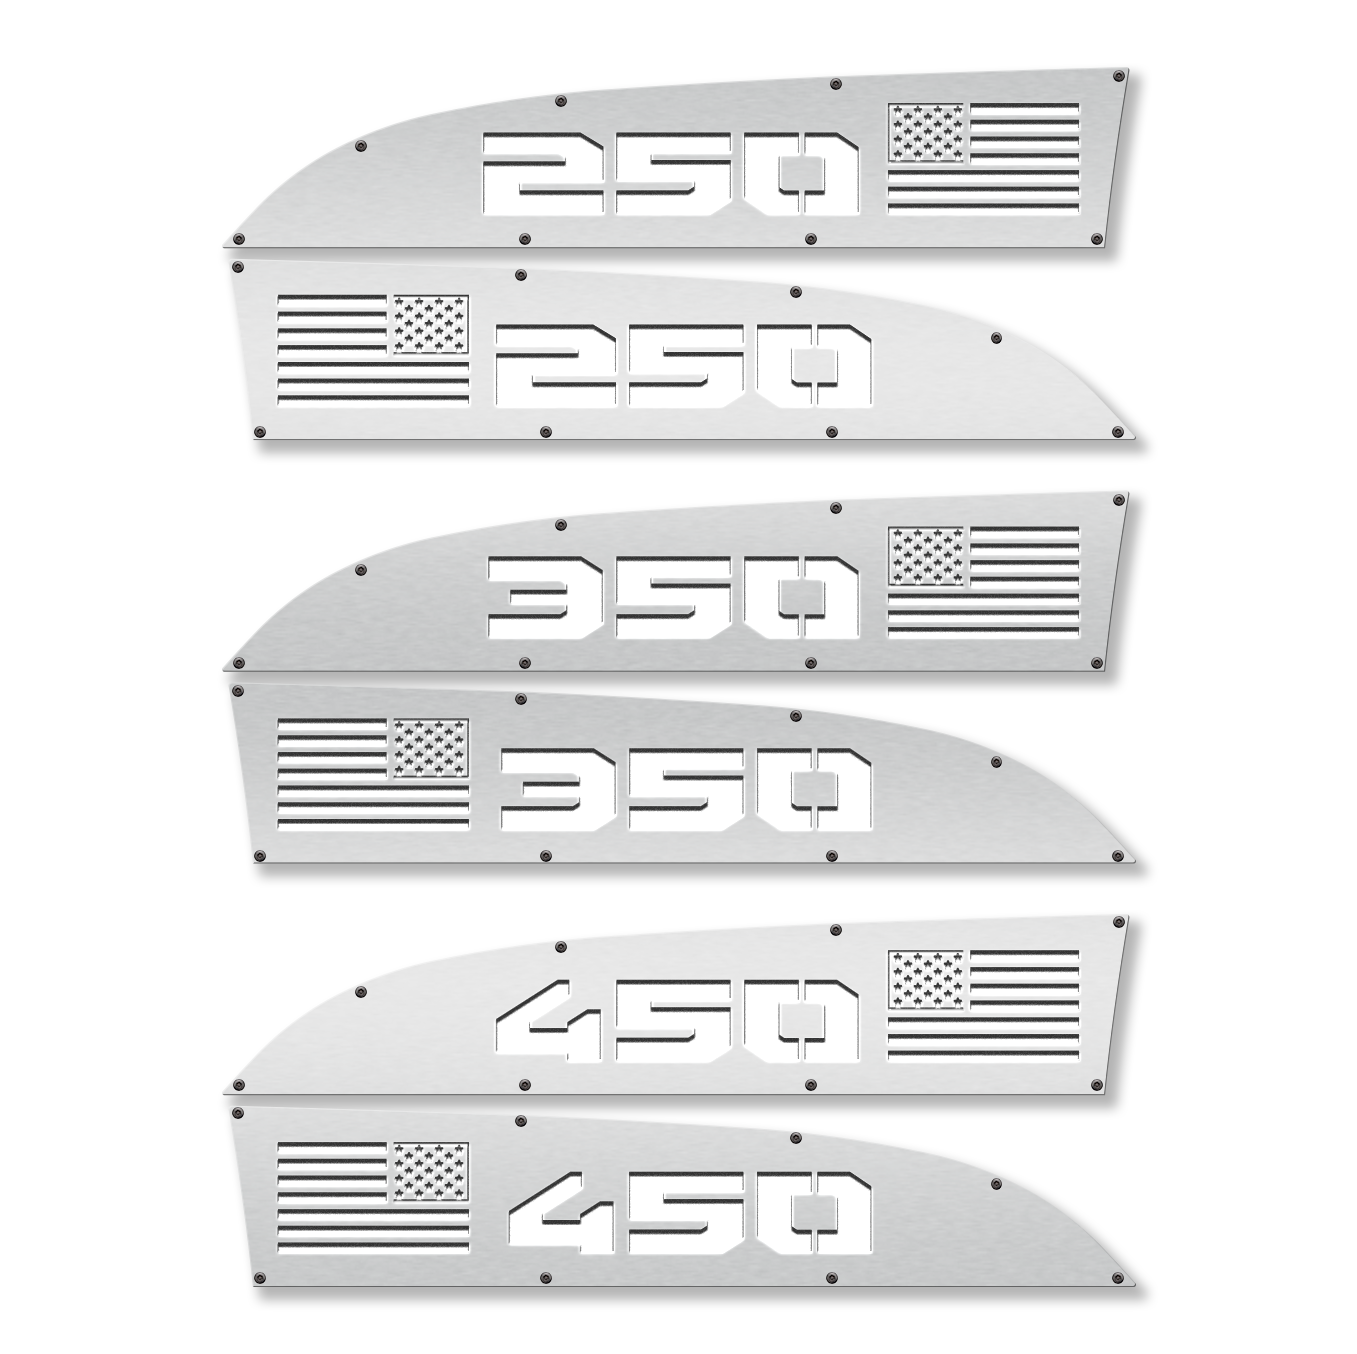 American Flag 250, 350, or 450 11-16 Ford® Super Duty® Fender Badge Replacements - Fully Customizable, LED and Non-LED